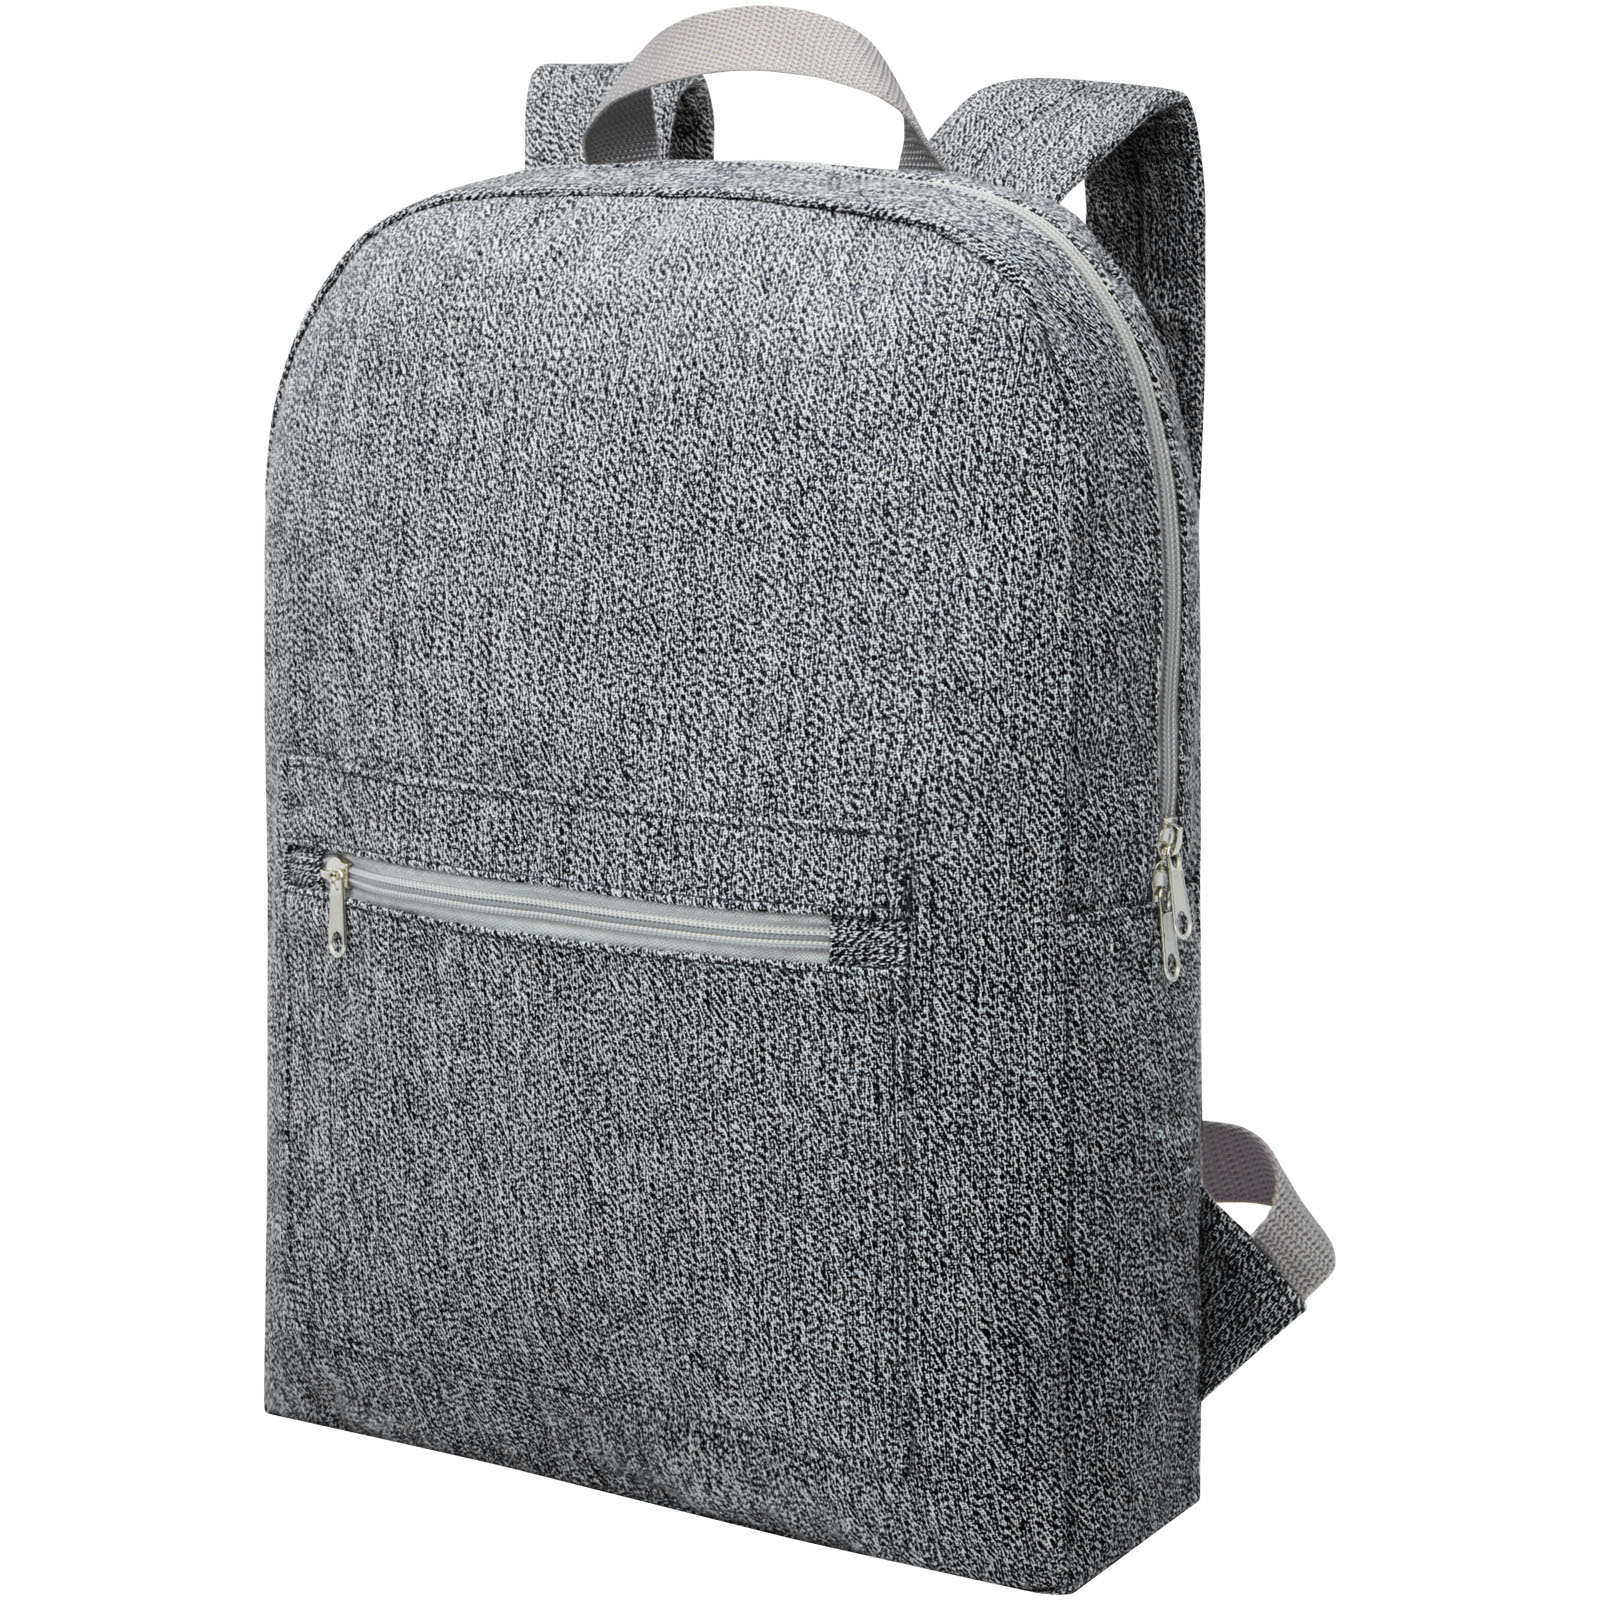 City backpack HOUGH made of recycled cotton